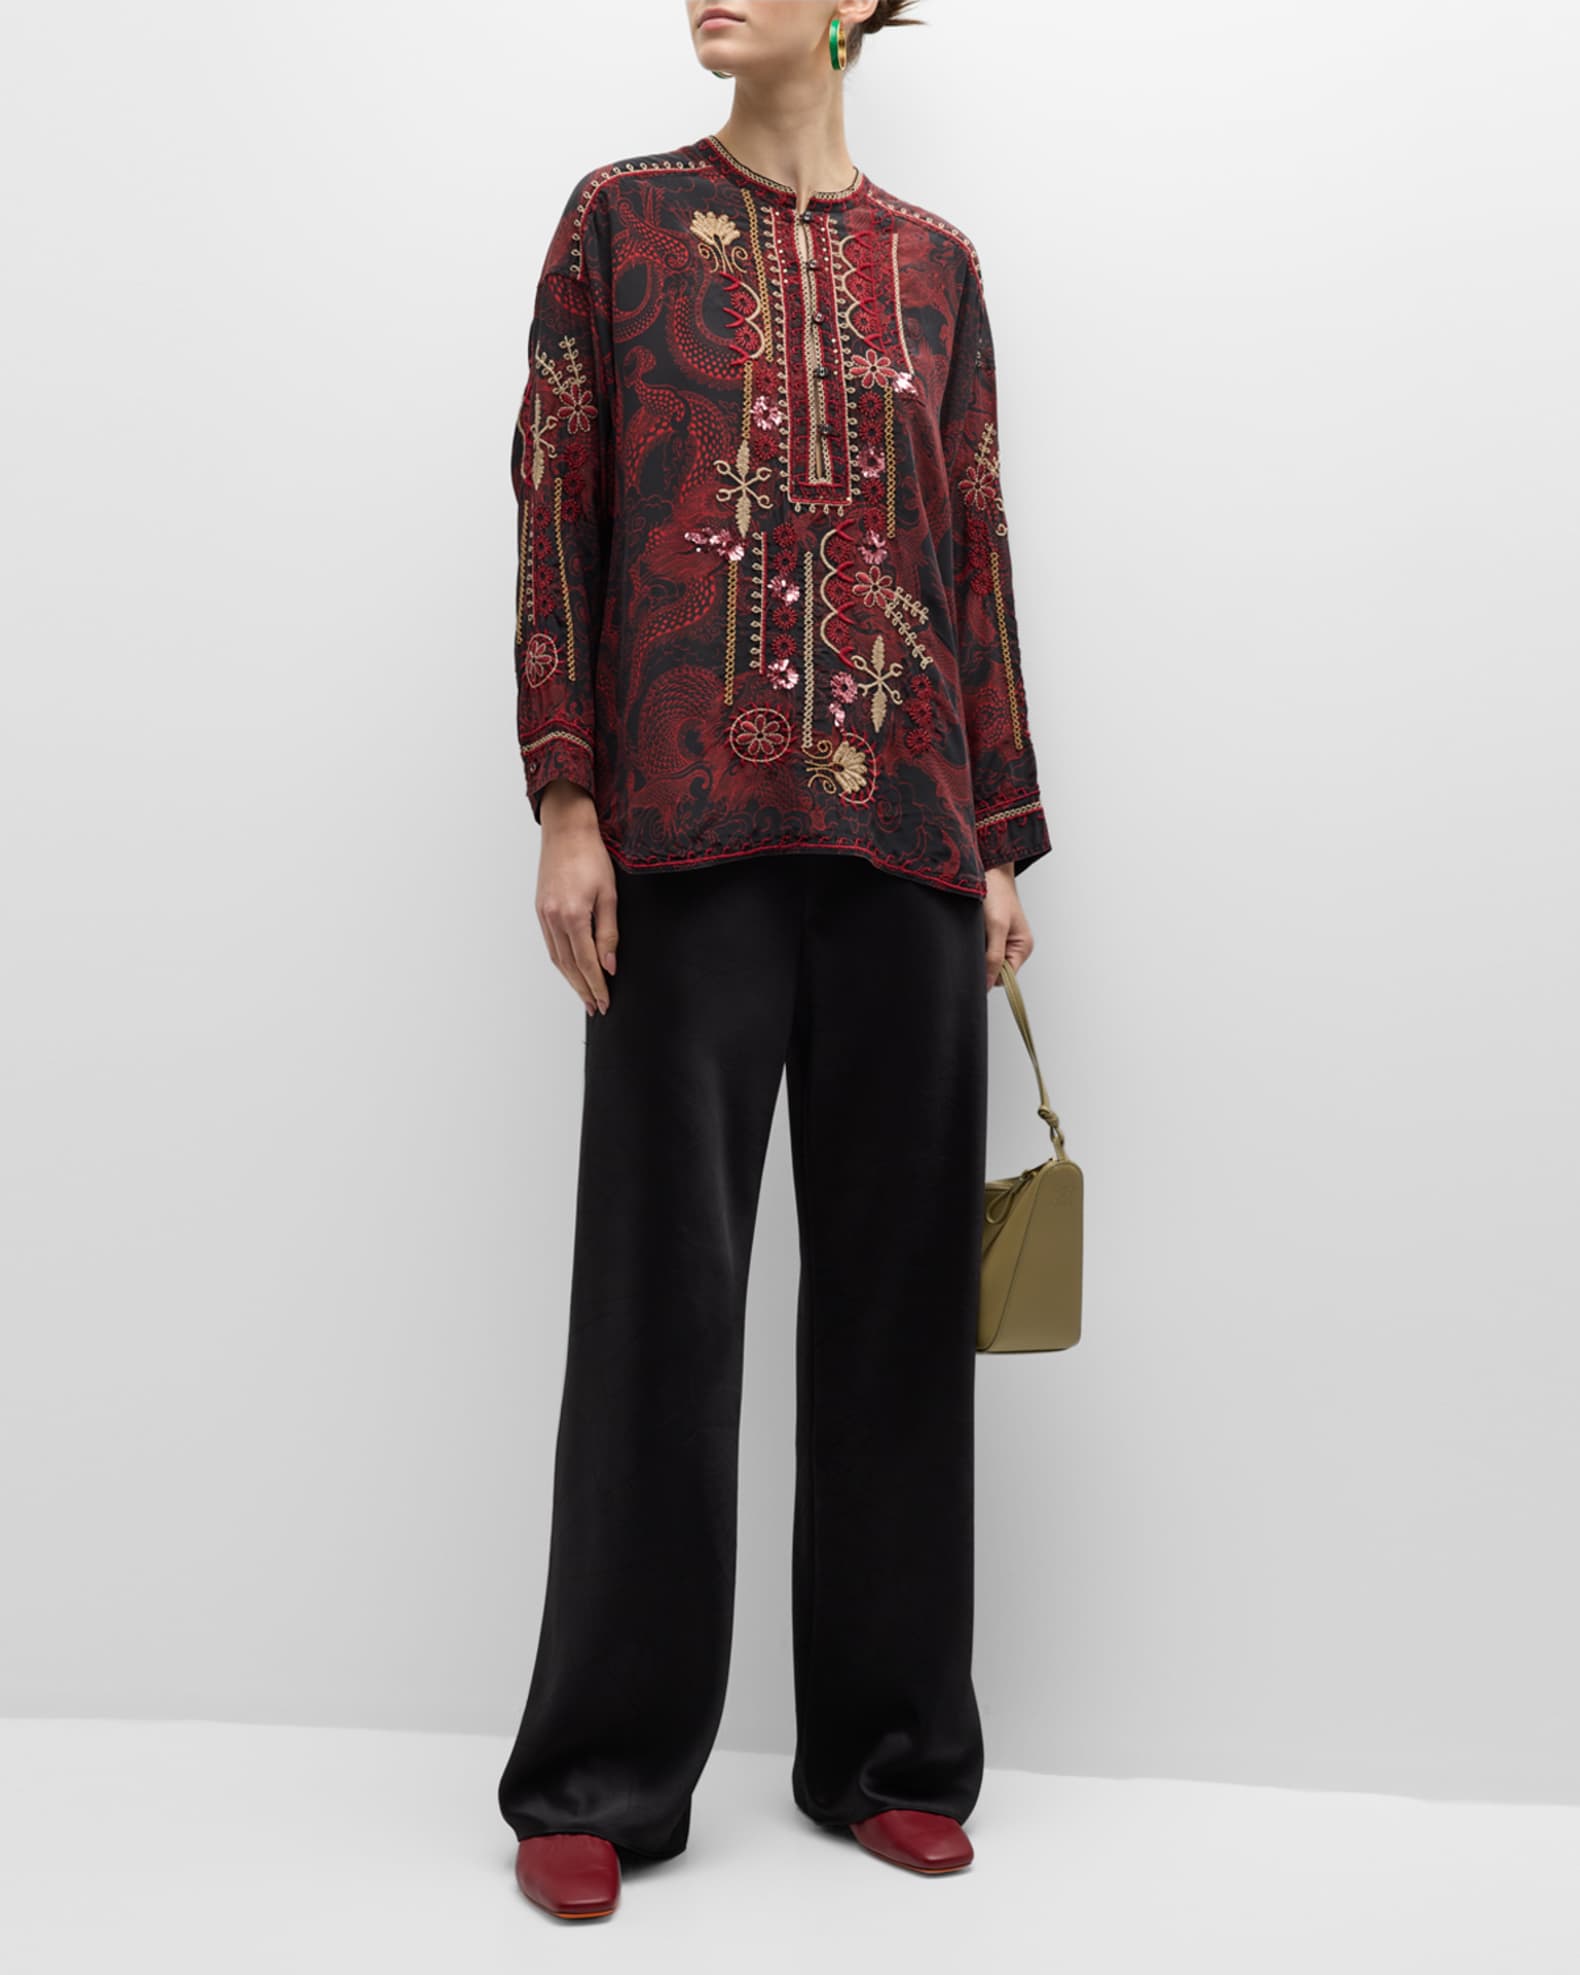 Johnny Was Belina Floral-Embroidered Dragon-Print Tunic | Neiman Marcus